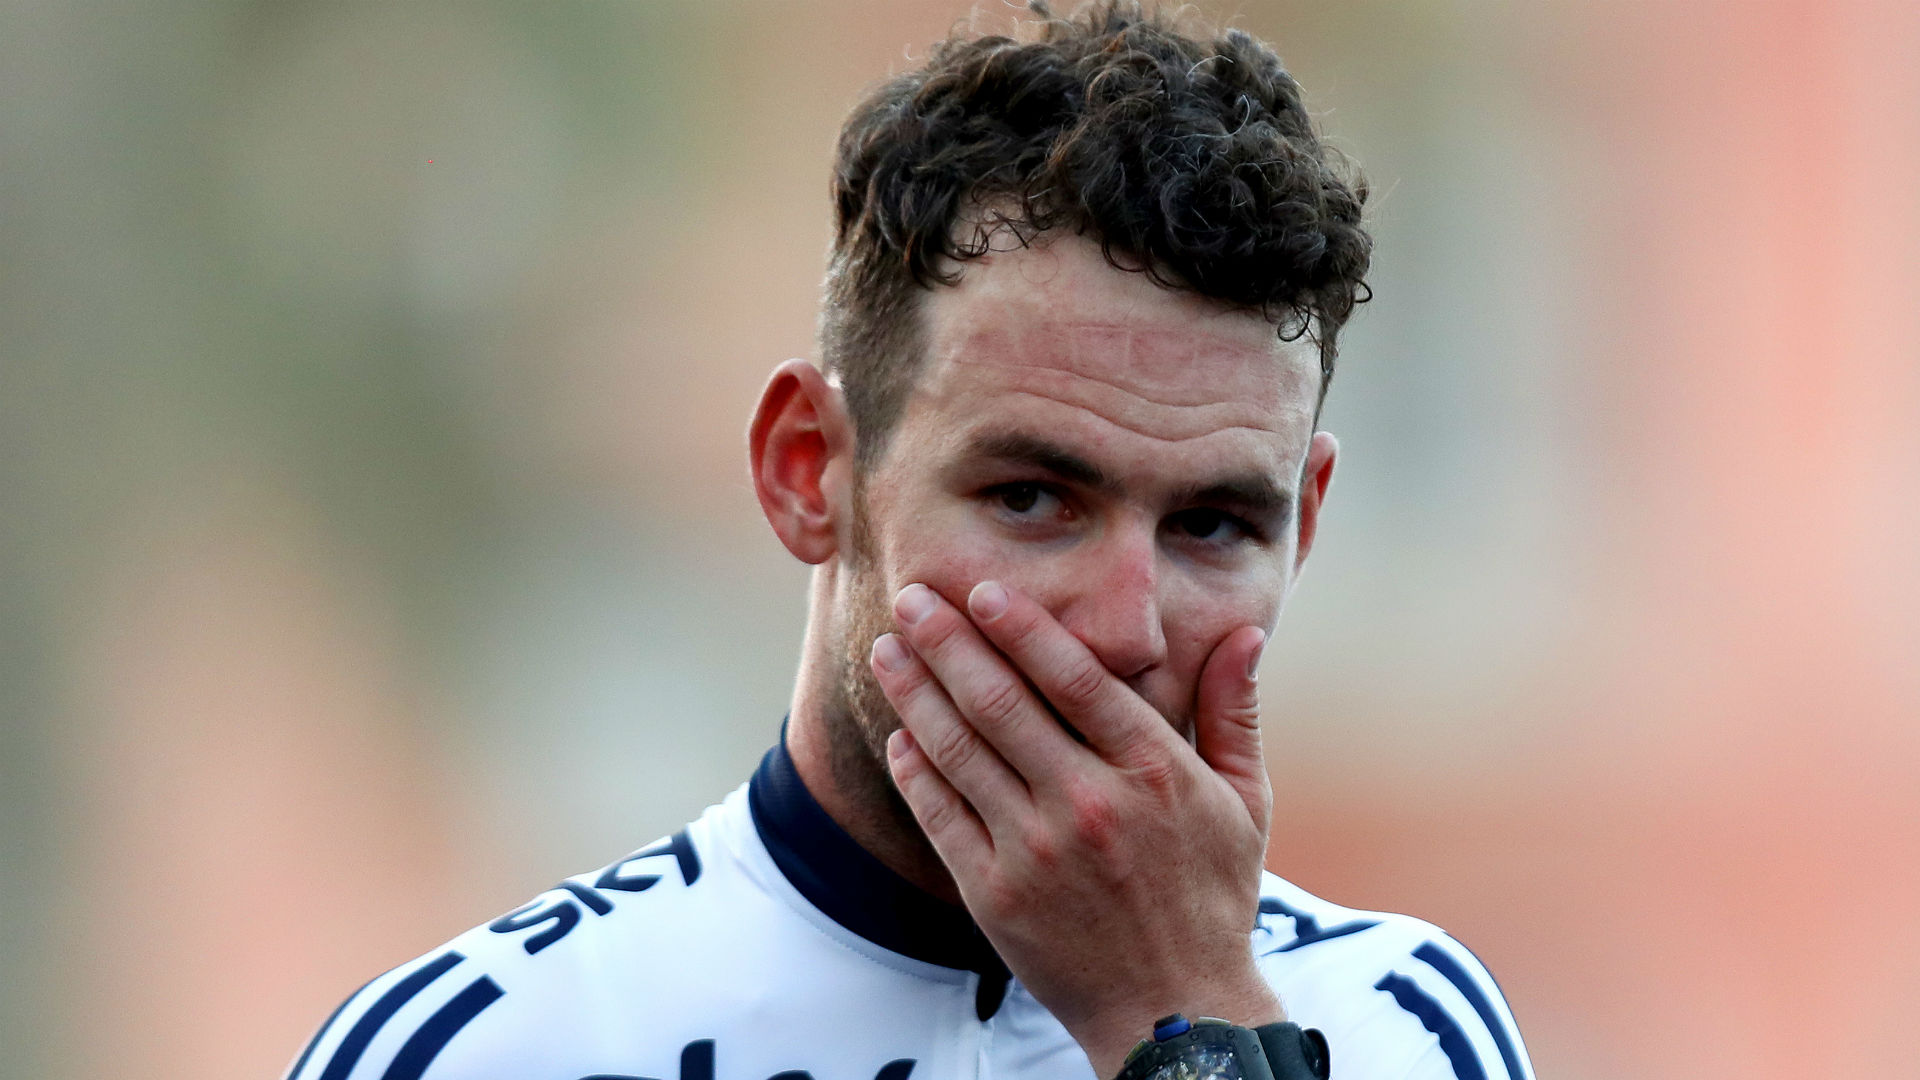 A broken rib and damaged ankle will prevent Mark Cavendish from racing for the Isle of Man at the Commonwealth Games next month.